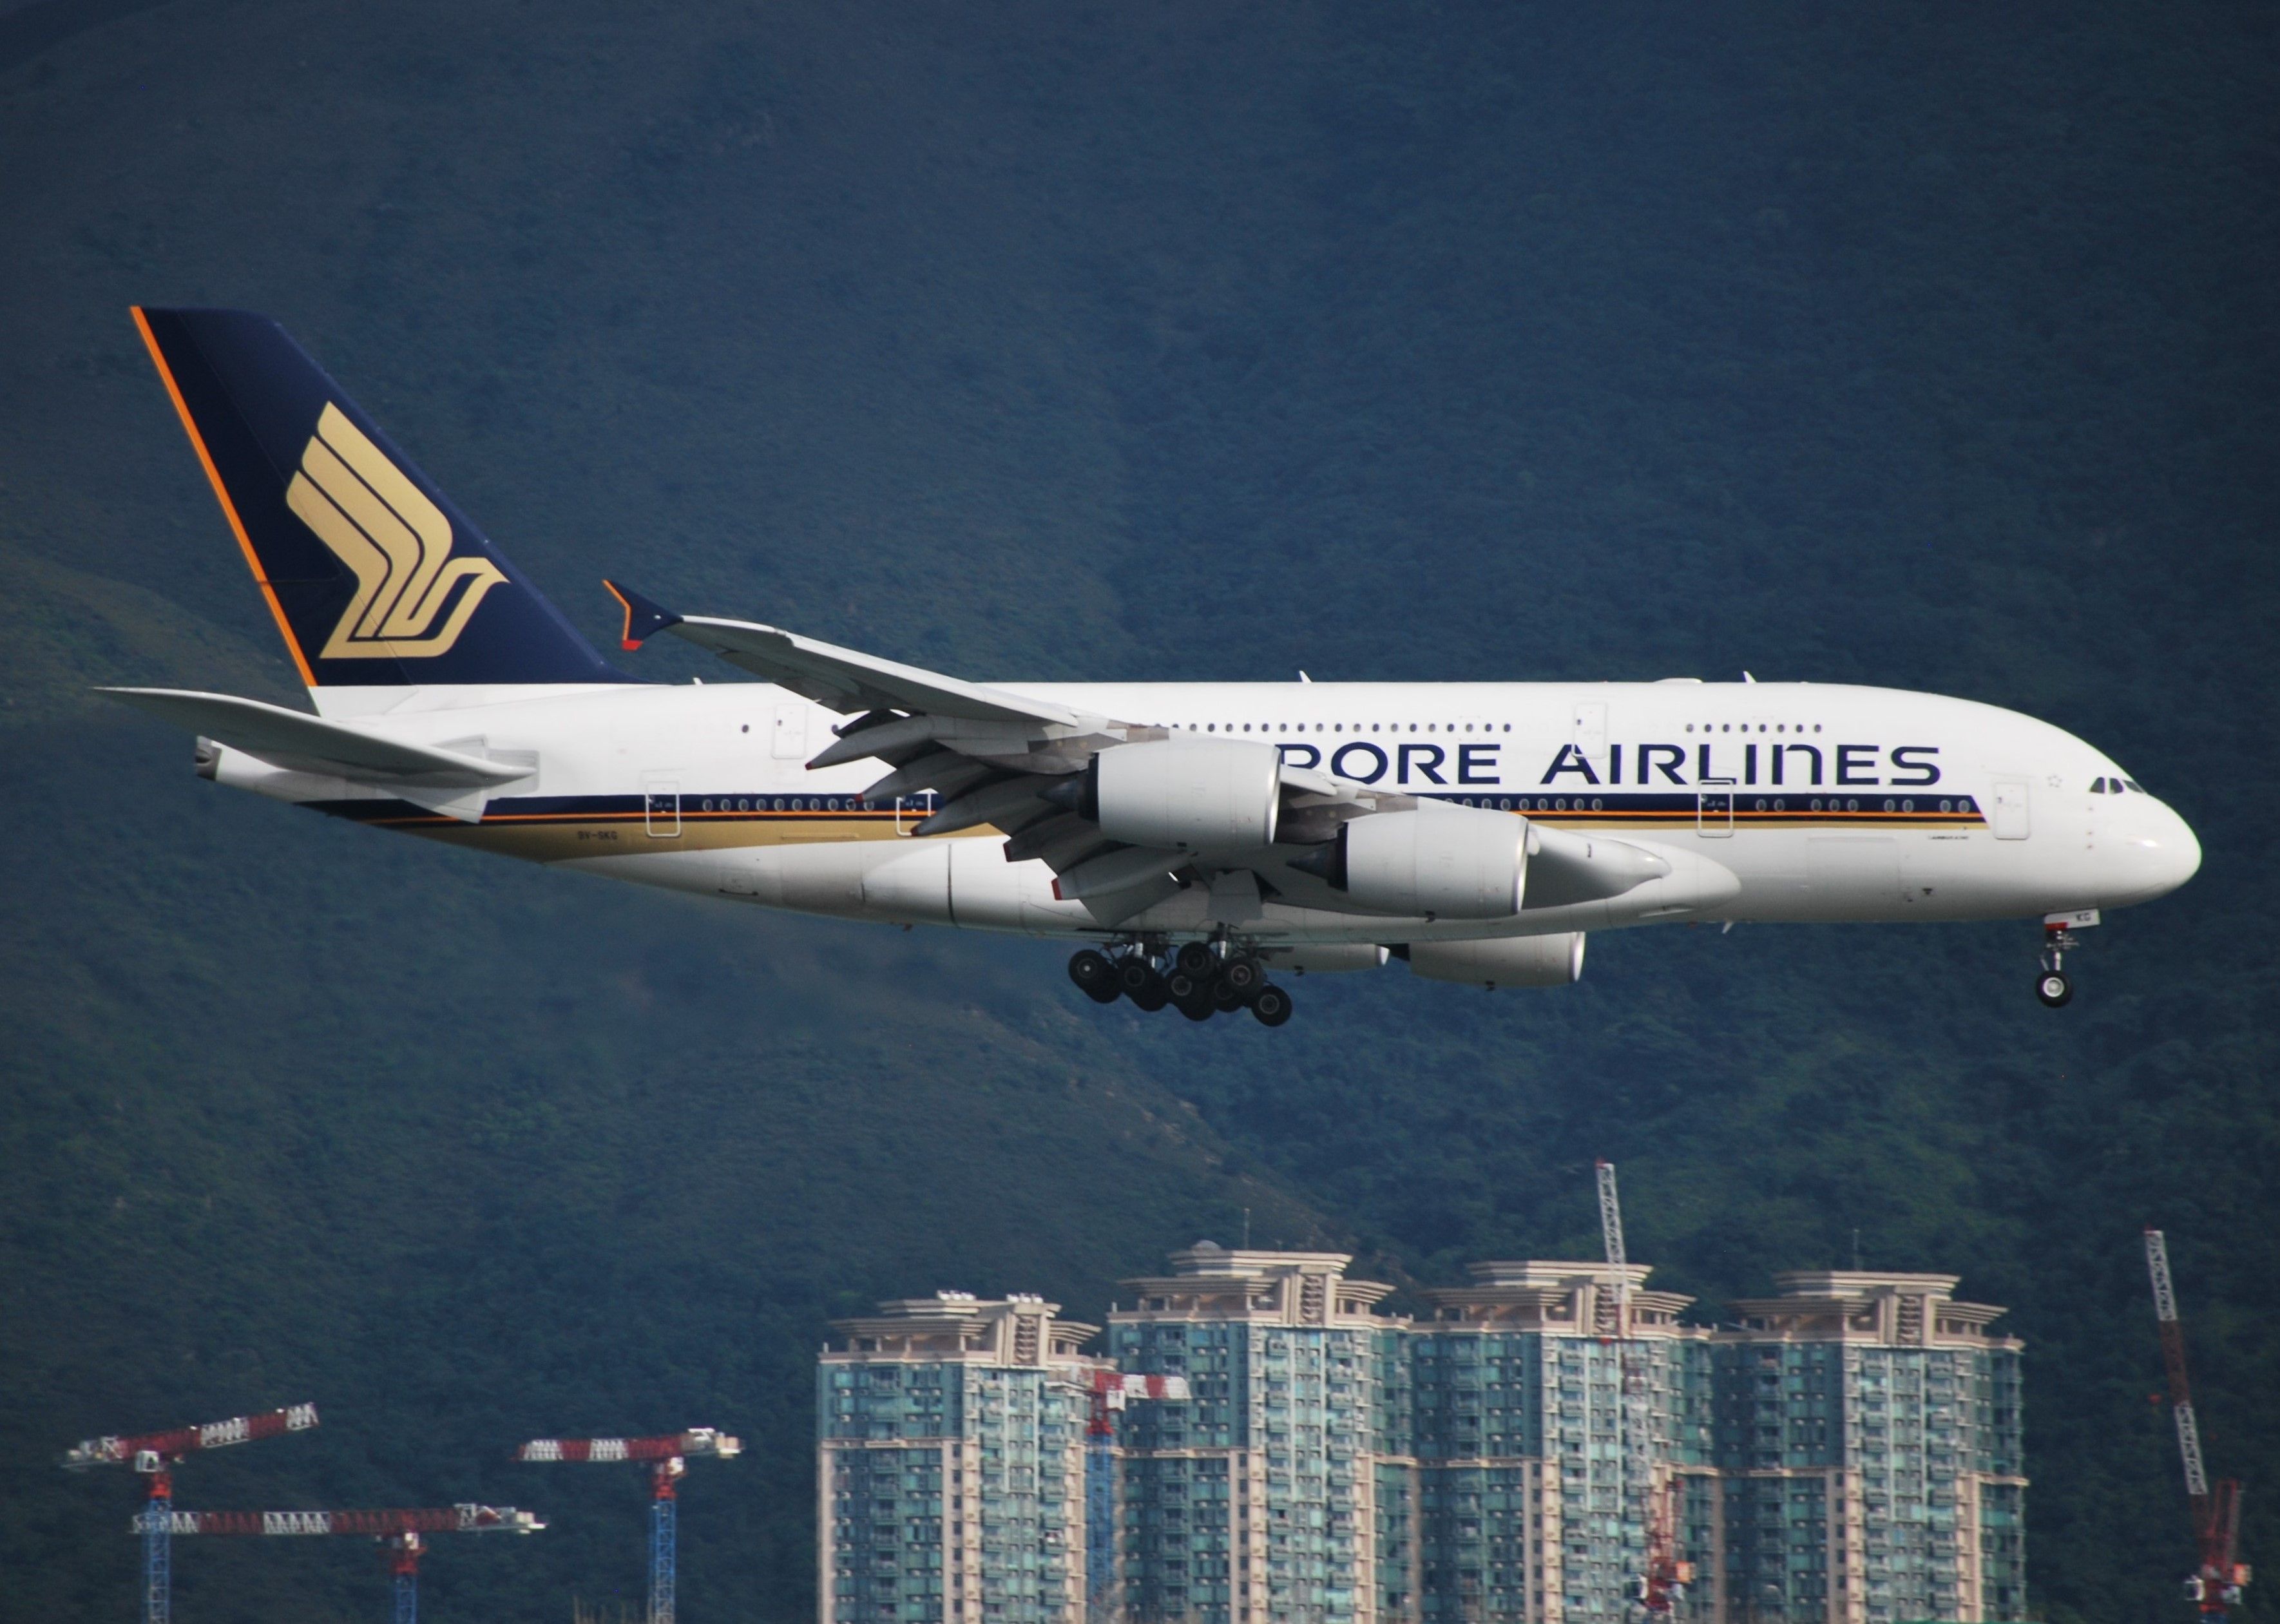 A Singapore Airlines Airbus A380 coming in for landing.